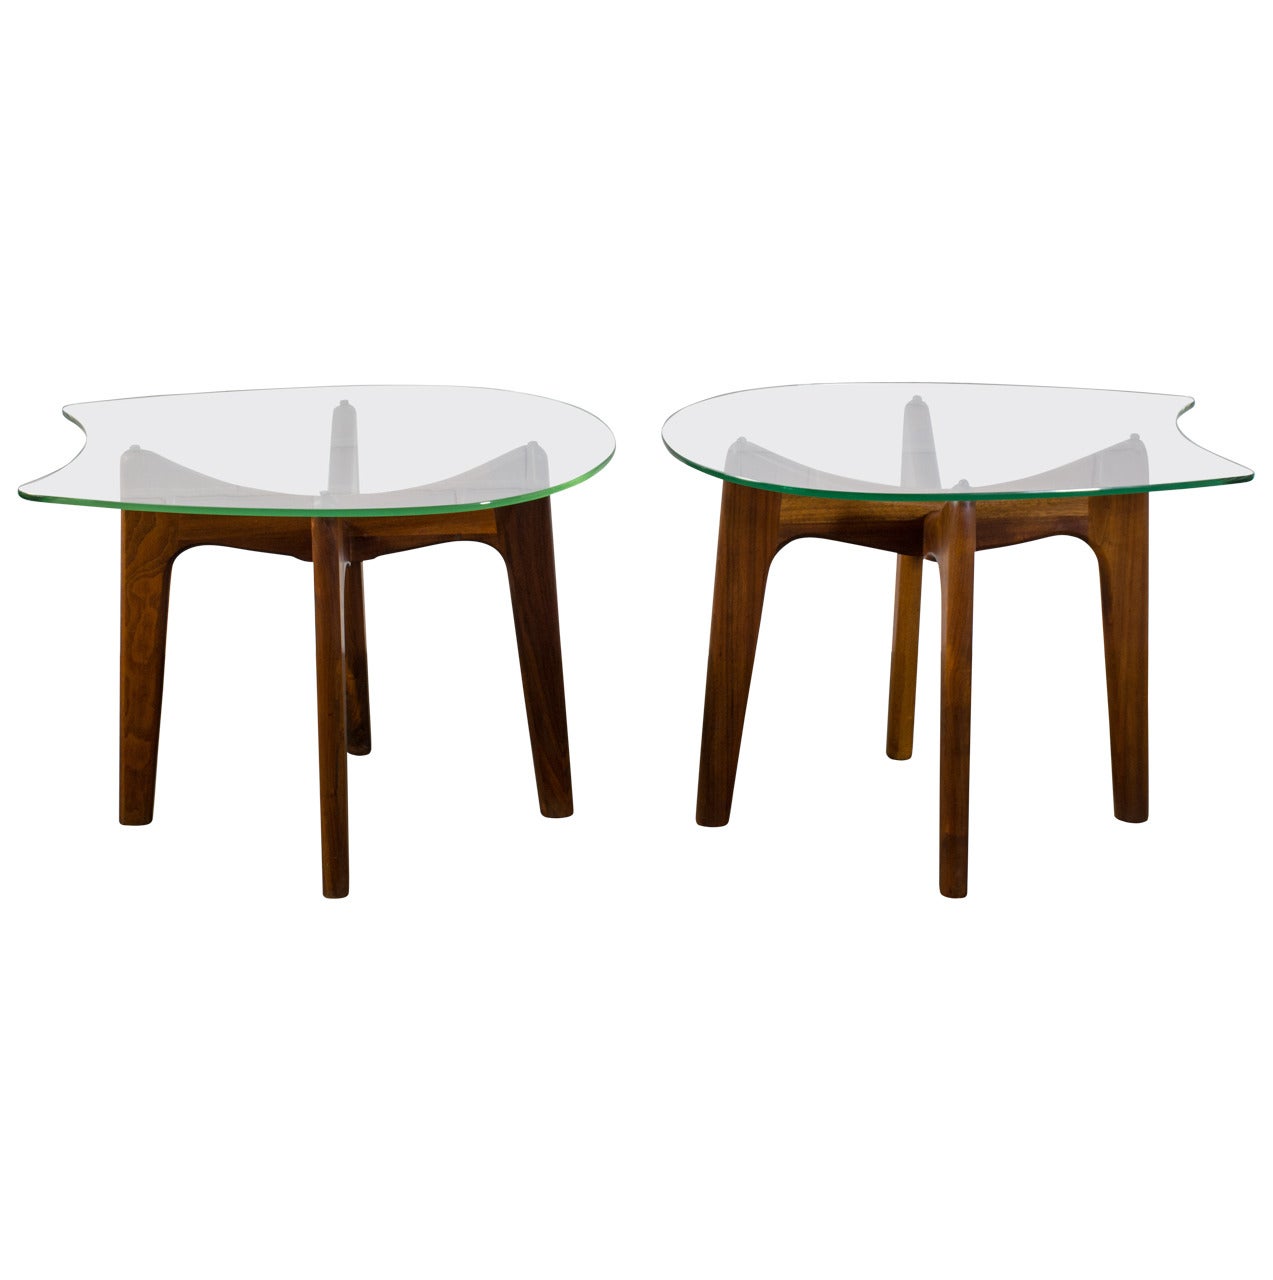 Pair of Adrian Pearsall Side Tables